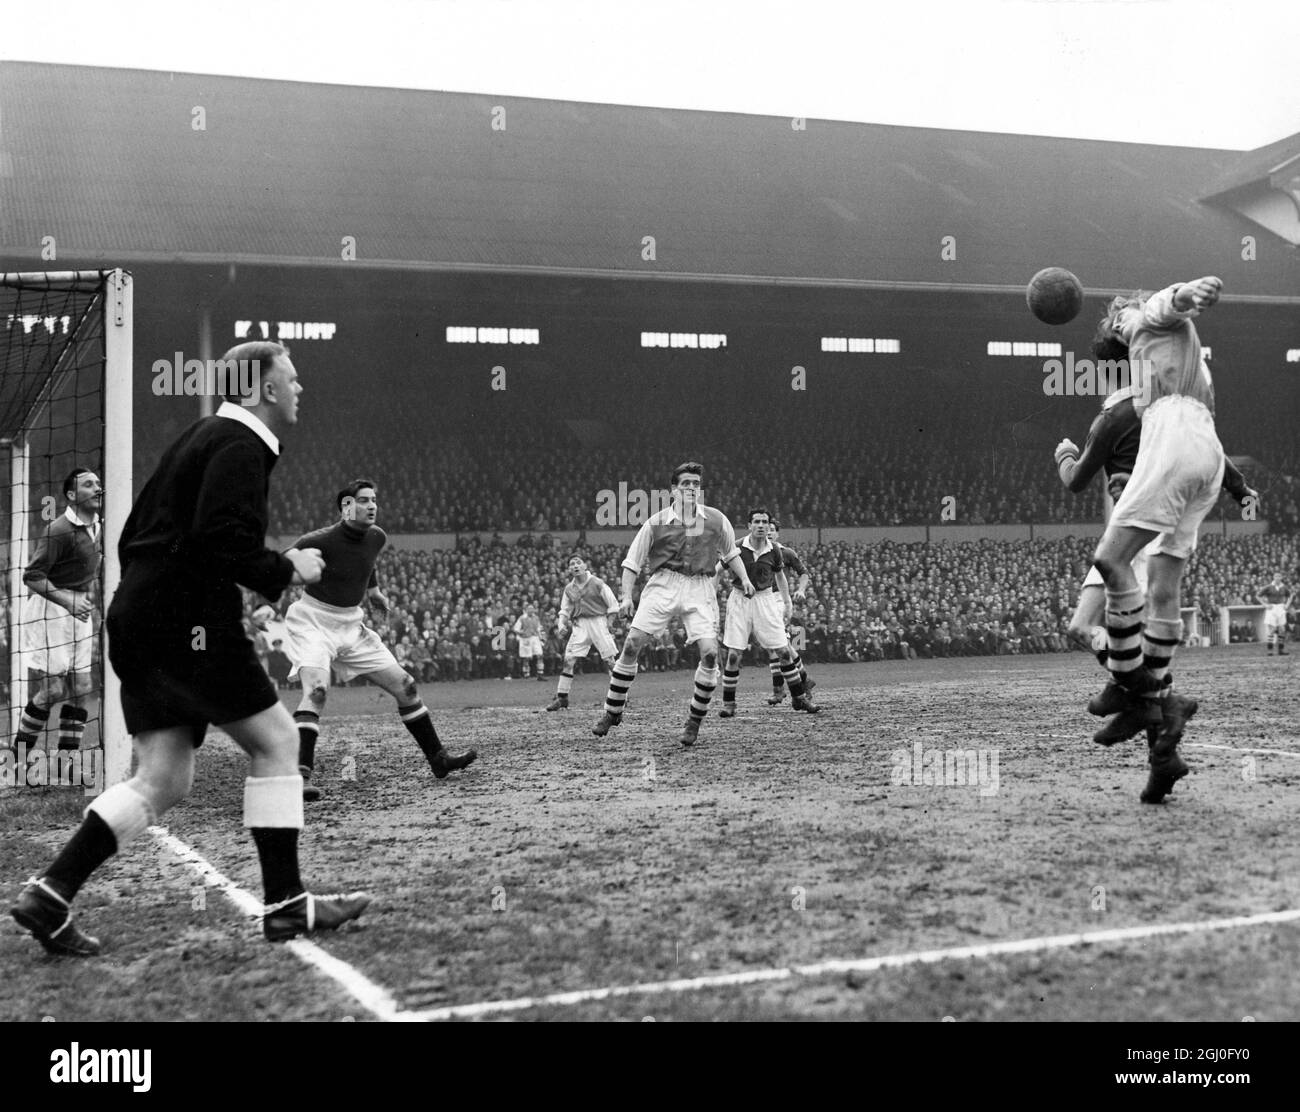 Arsenal v Chelsea Goring (right) of Arsenal beats Harris (Chelsea) to the ball and Doug Lishman scorers Arsenal's third goal during the replayed FA Cup semi-final at Tottenham Hotspur. 7th April 1952. Stock Photo